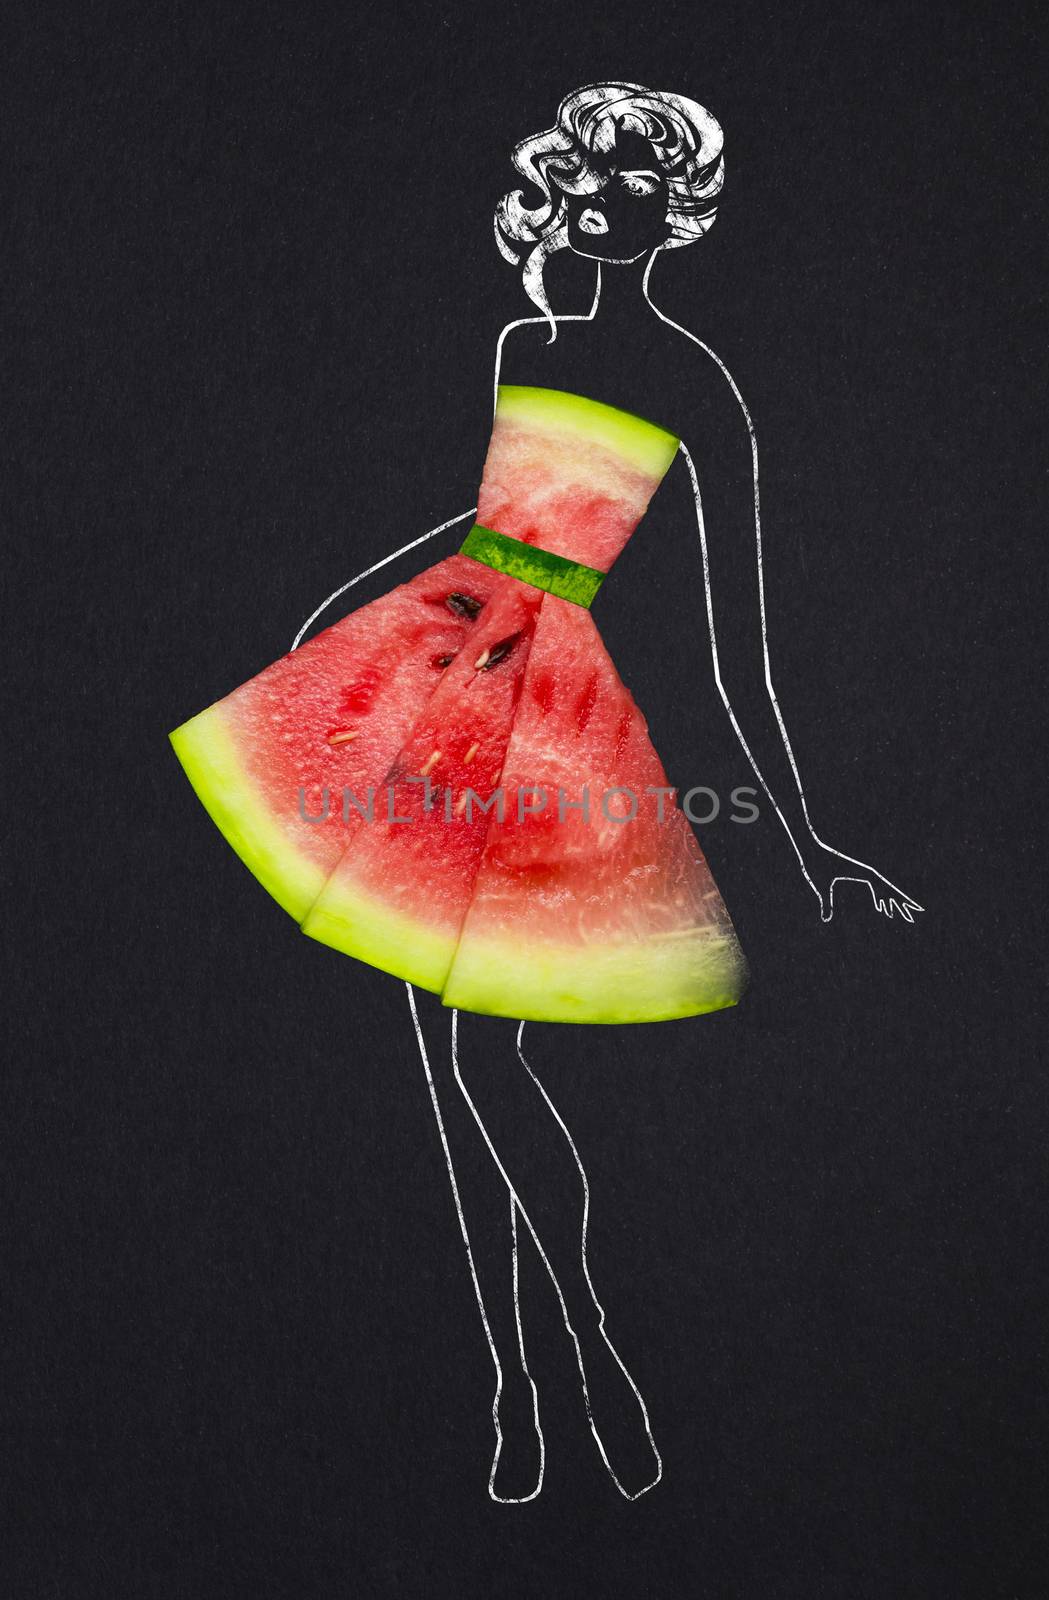 Creative concept photo of a watermelon as a dress with illustrated woman on black background.